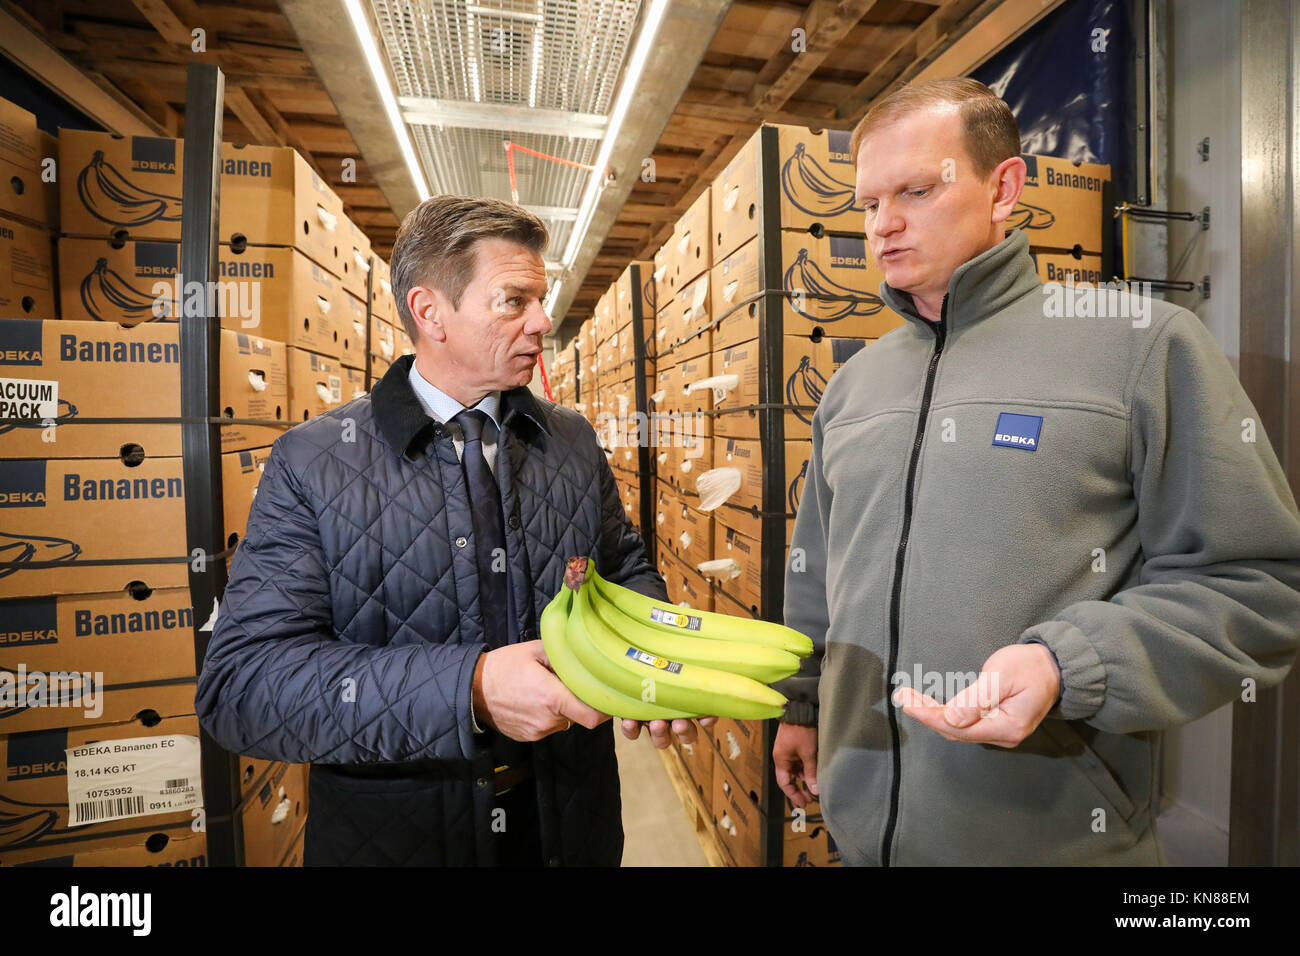 Stefan Worm (L), leader of Edeka Fruchtkontor Nord, talks to fruit ripening master Patrick Muenzner about the state of maturity of bananas in a ripening chamber from the new banana ripening store of the provision merchant in Borna, Germany, 15 November 2017. The green fruit ripens here under supervision for several days before they hit the shelves. The banana is a decisive economic factor: about 10 percent of Edeka's sales revenues is generated through bananas and pineapples. The banana is Germany's second favourite fruit after apples. The average German household buys an average of 16.64 kilo Stock Photo